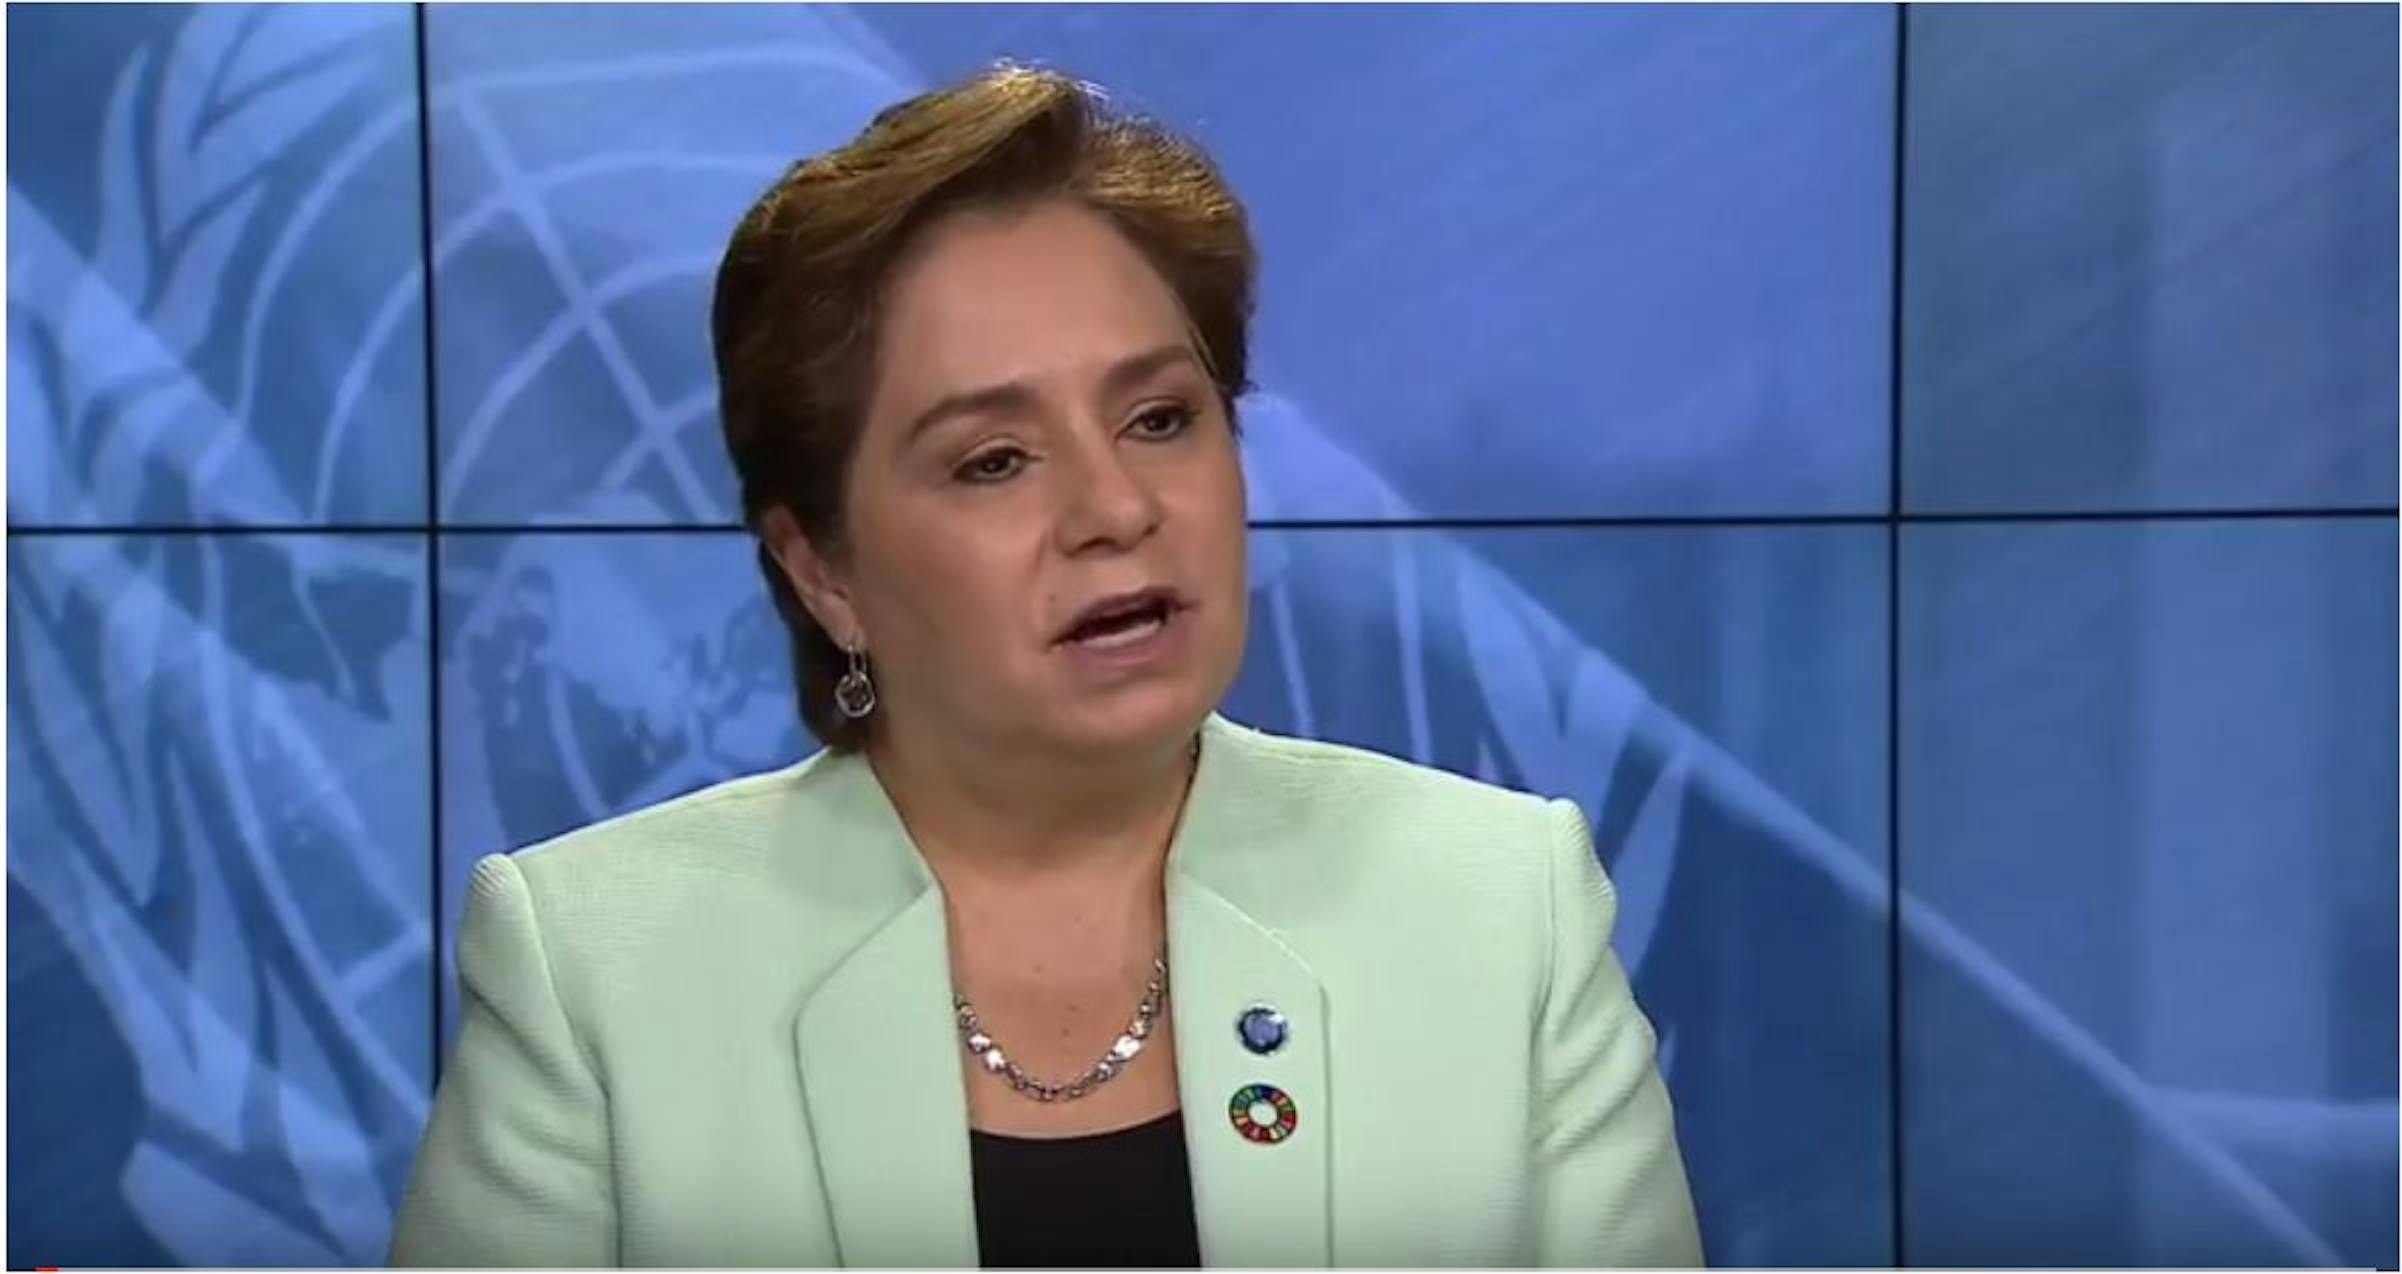 Screen Grab: Patricia Espinosa August 3 interview on Climate Change